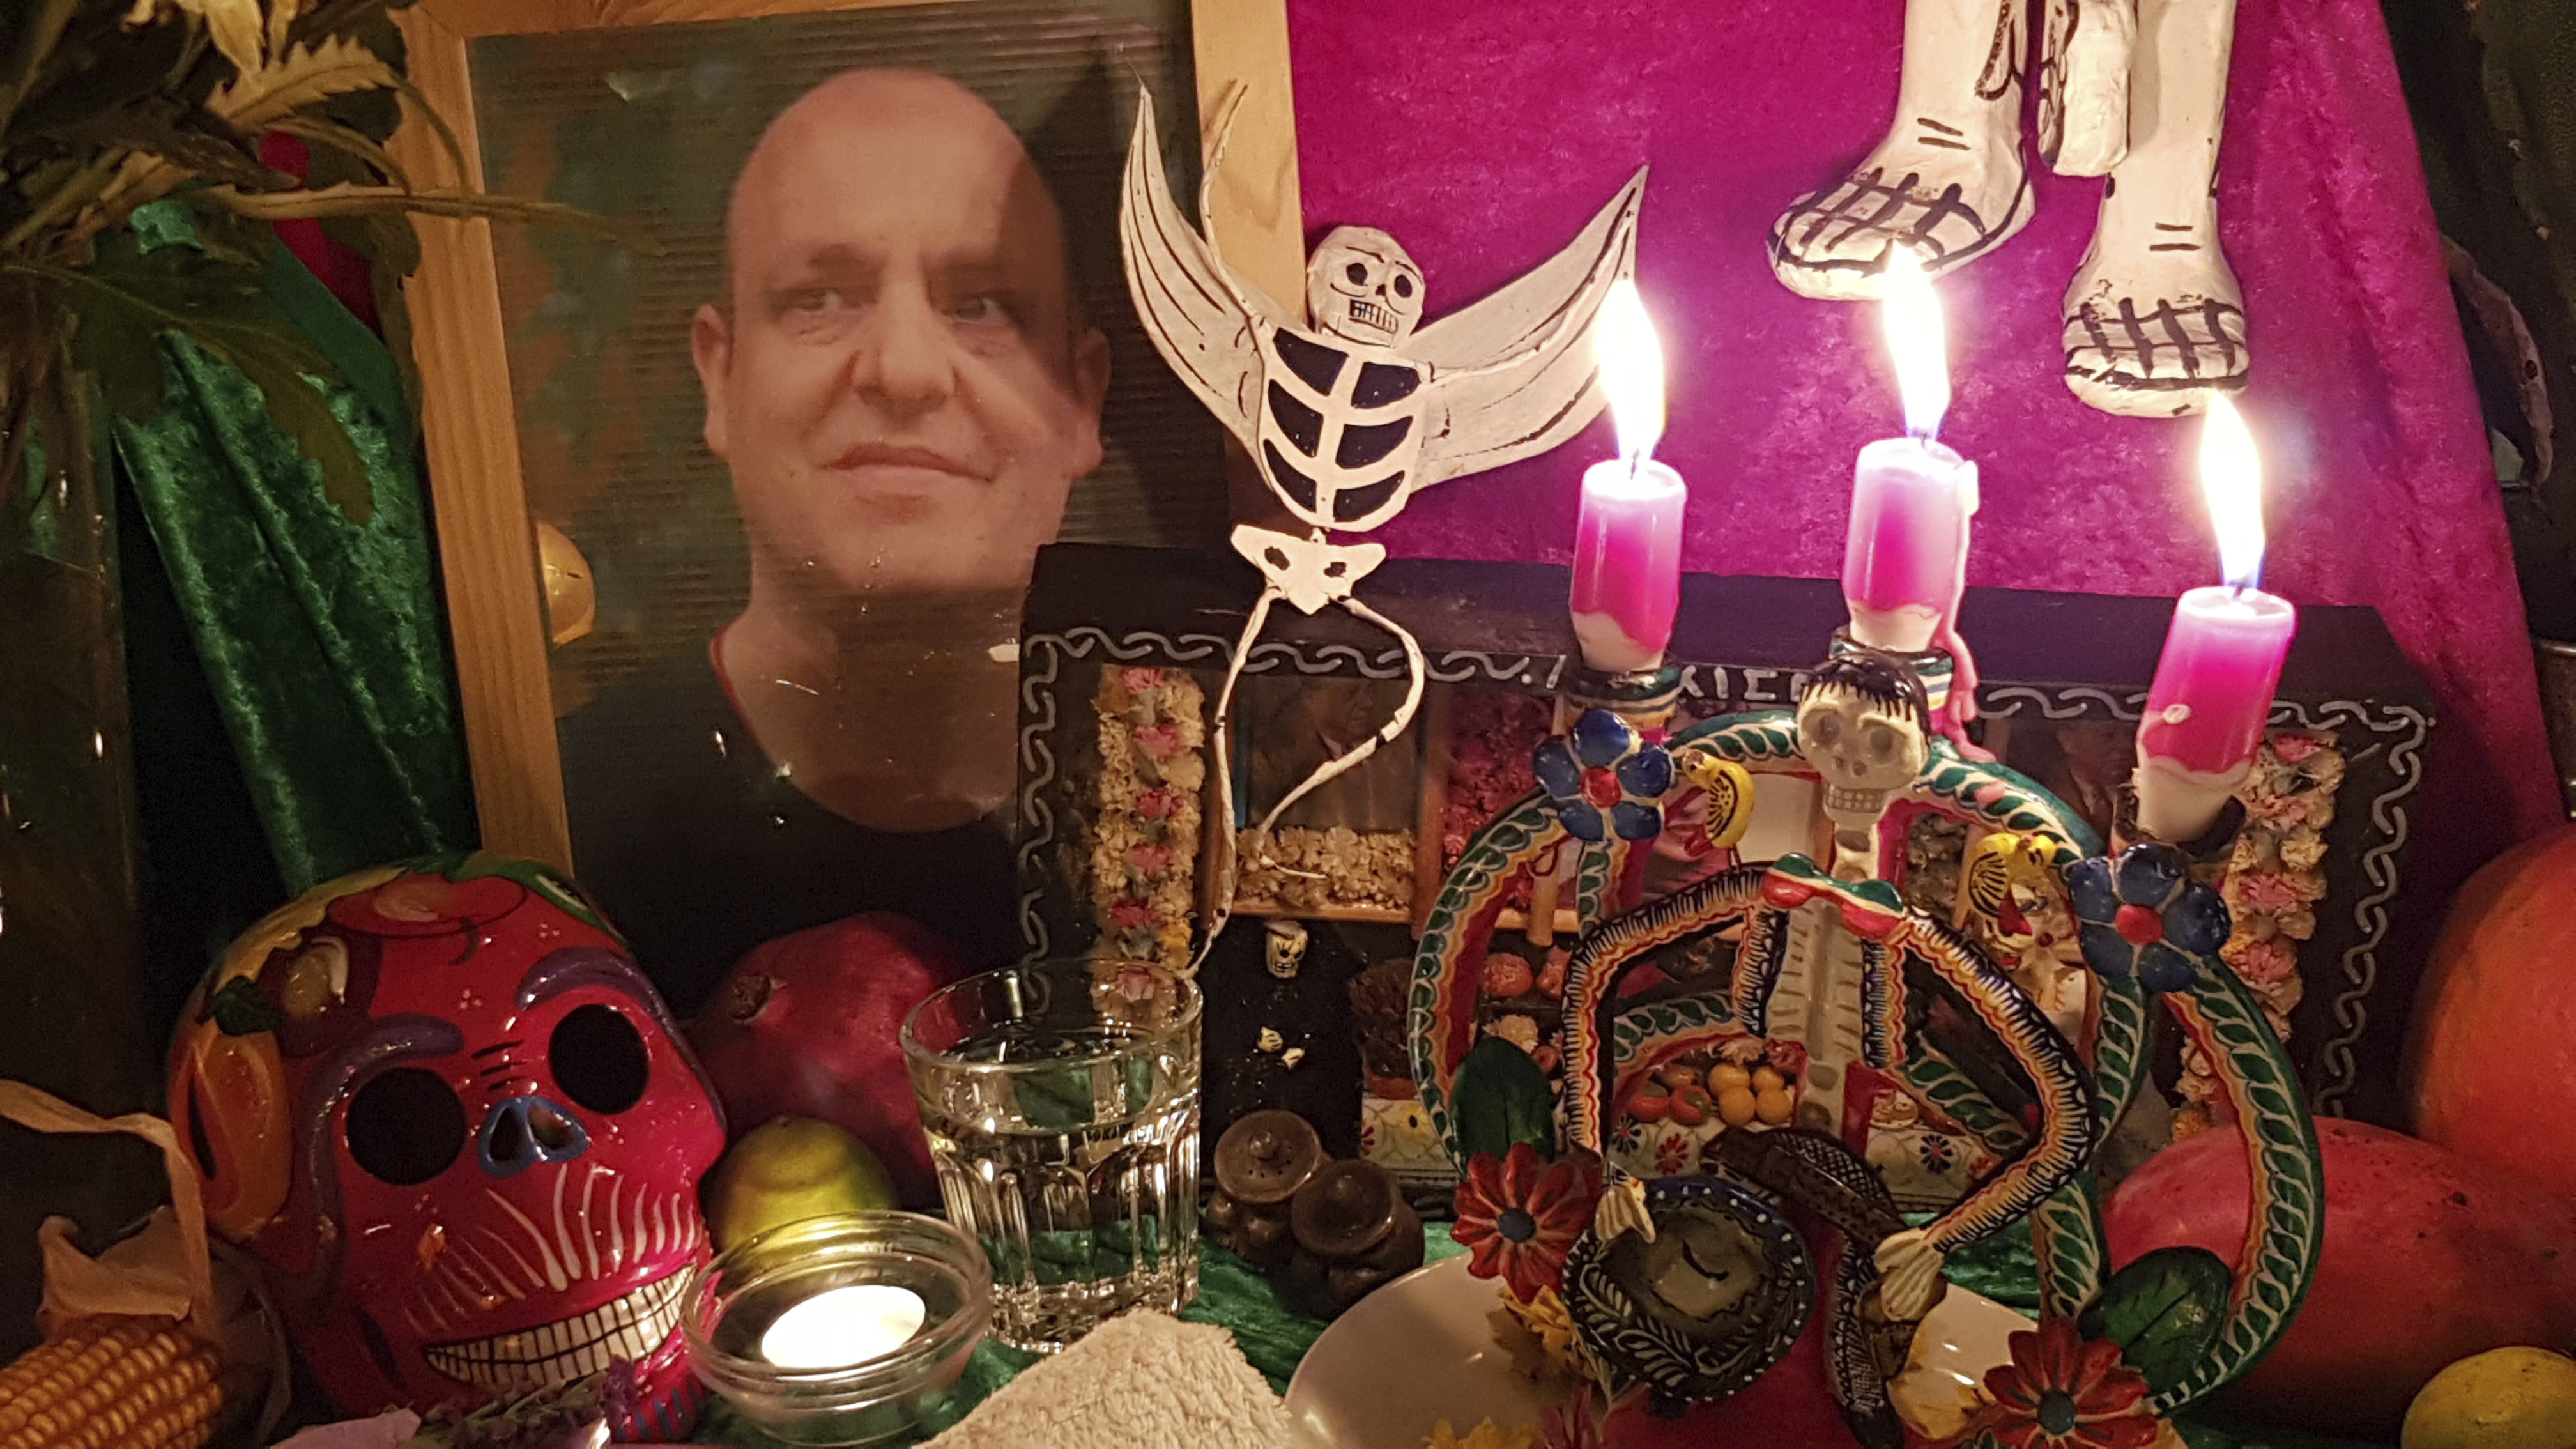 An altar made by mortician and Death Café host Angela Craig-Fournes in honor of Death Café founder Jon Underwood, who died in 2017. ANGELA CRAIG-FOURNES